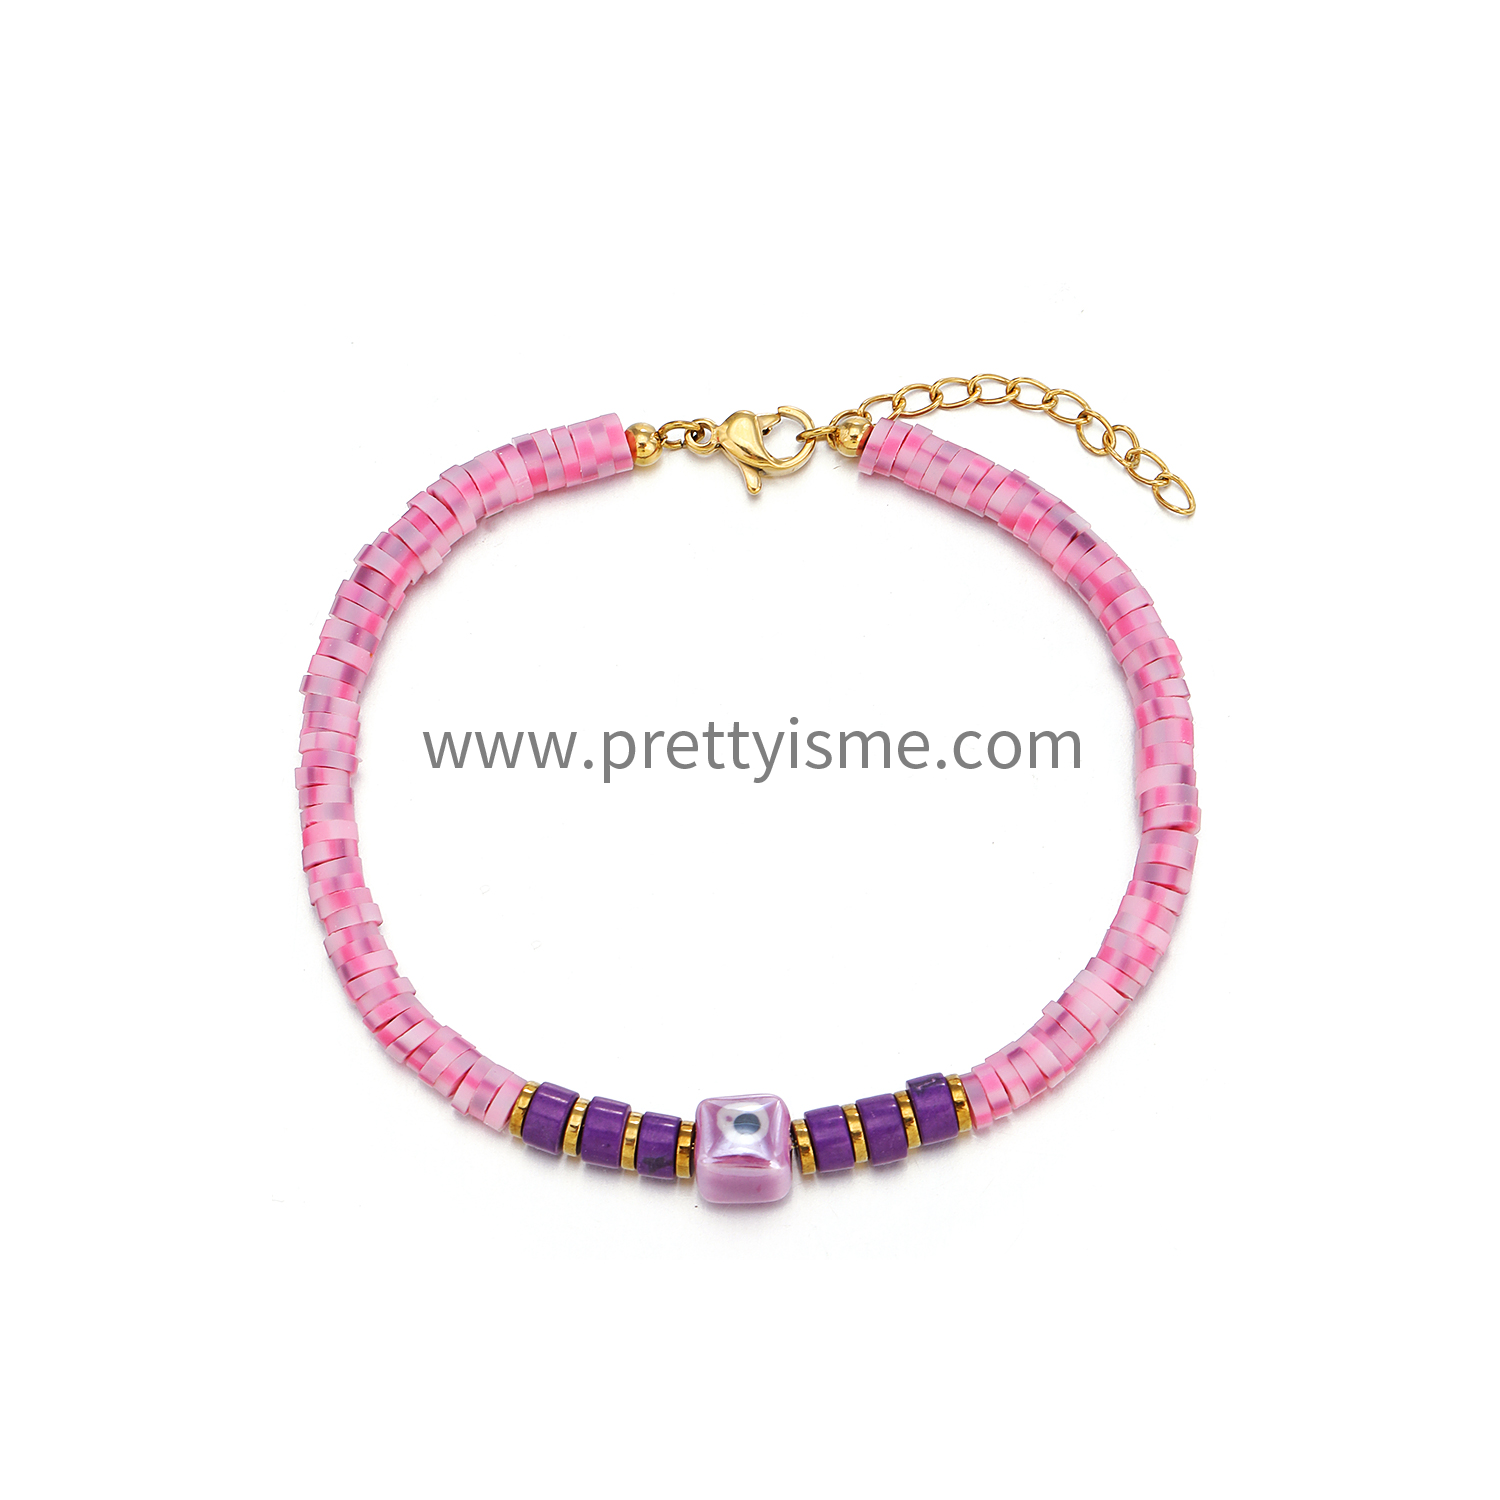 Pretty Is Me Collection 18K Gold Plated 316L Stainless Steel Purple Stone Pink Polymer Clay Ceramics Eye Charm Bracelet Women (7).webp